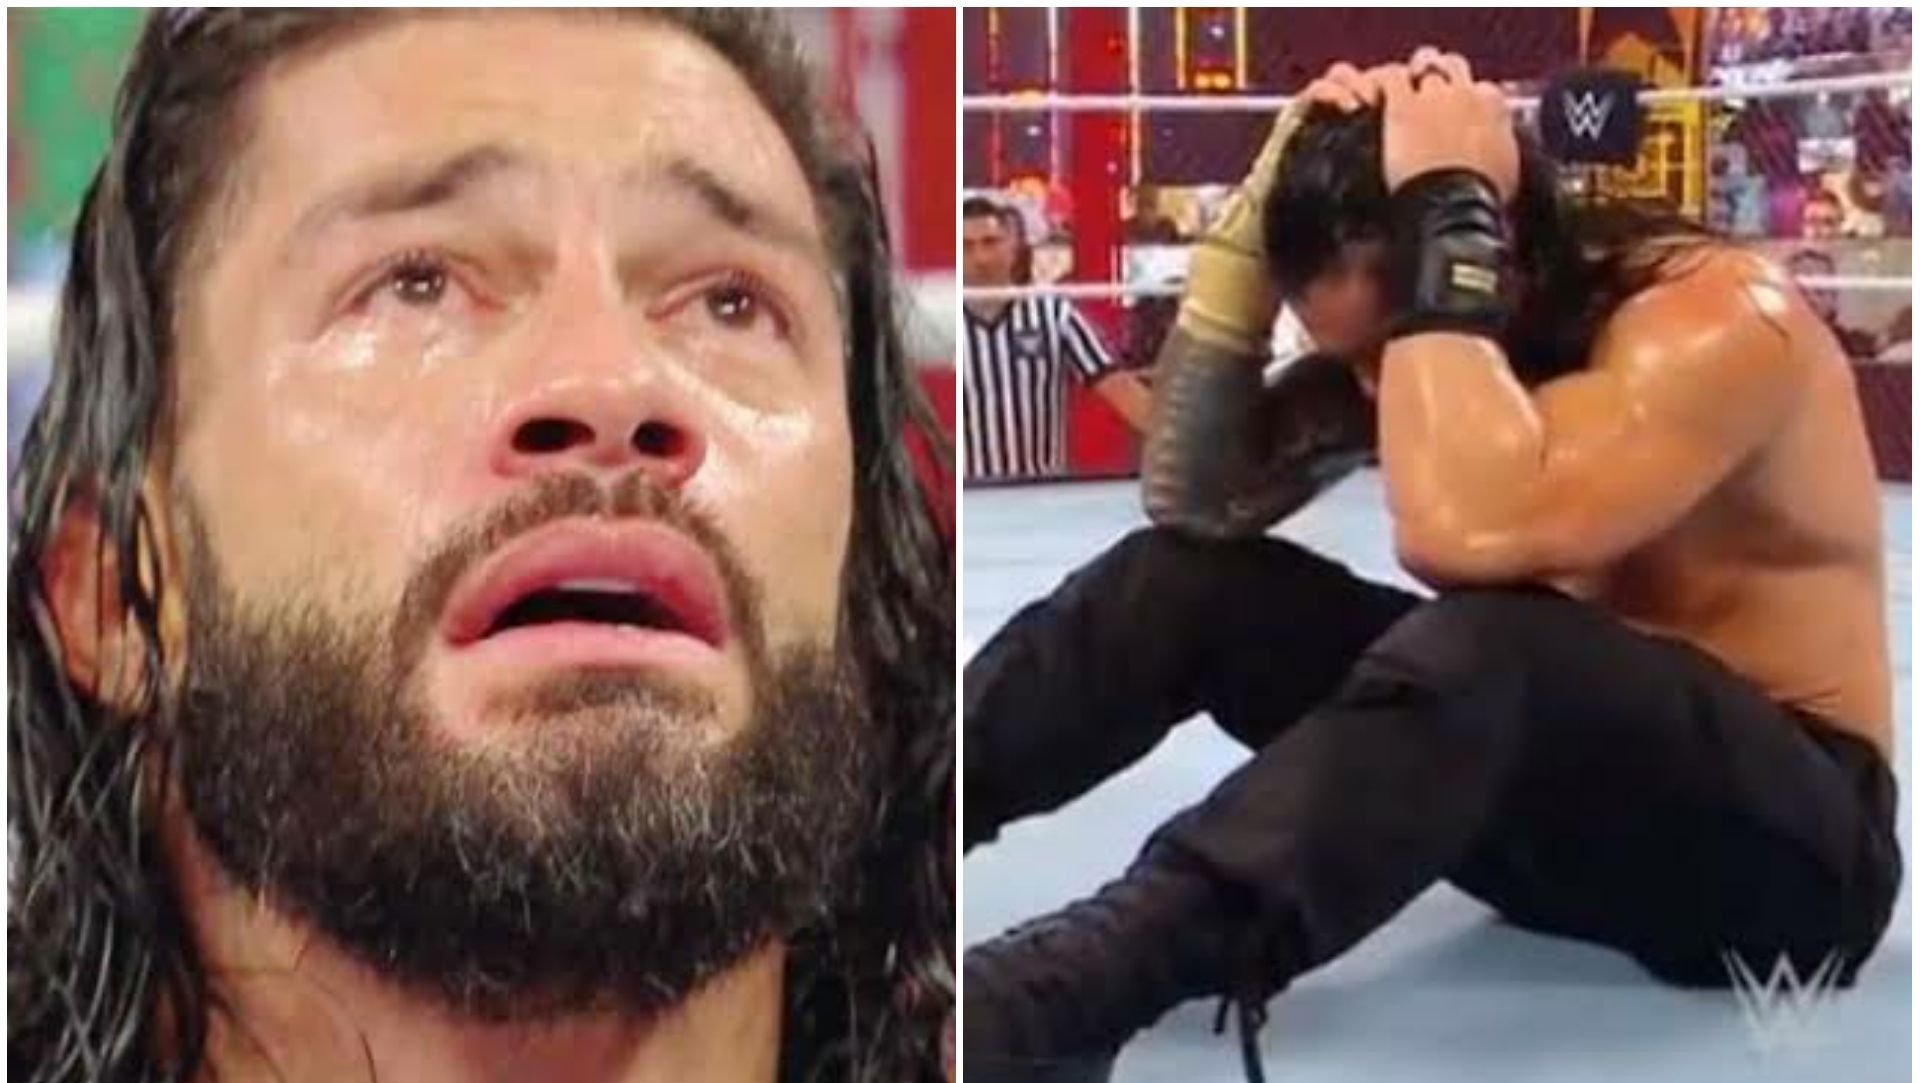 Roman Reigns could lose his title after a massive betrayal at SummerSlam.